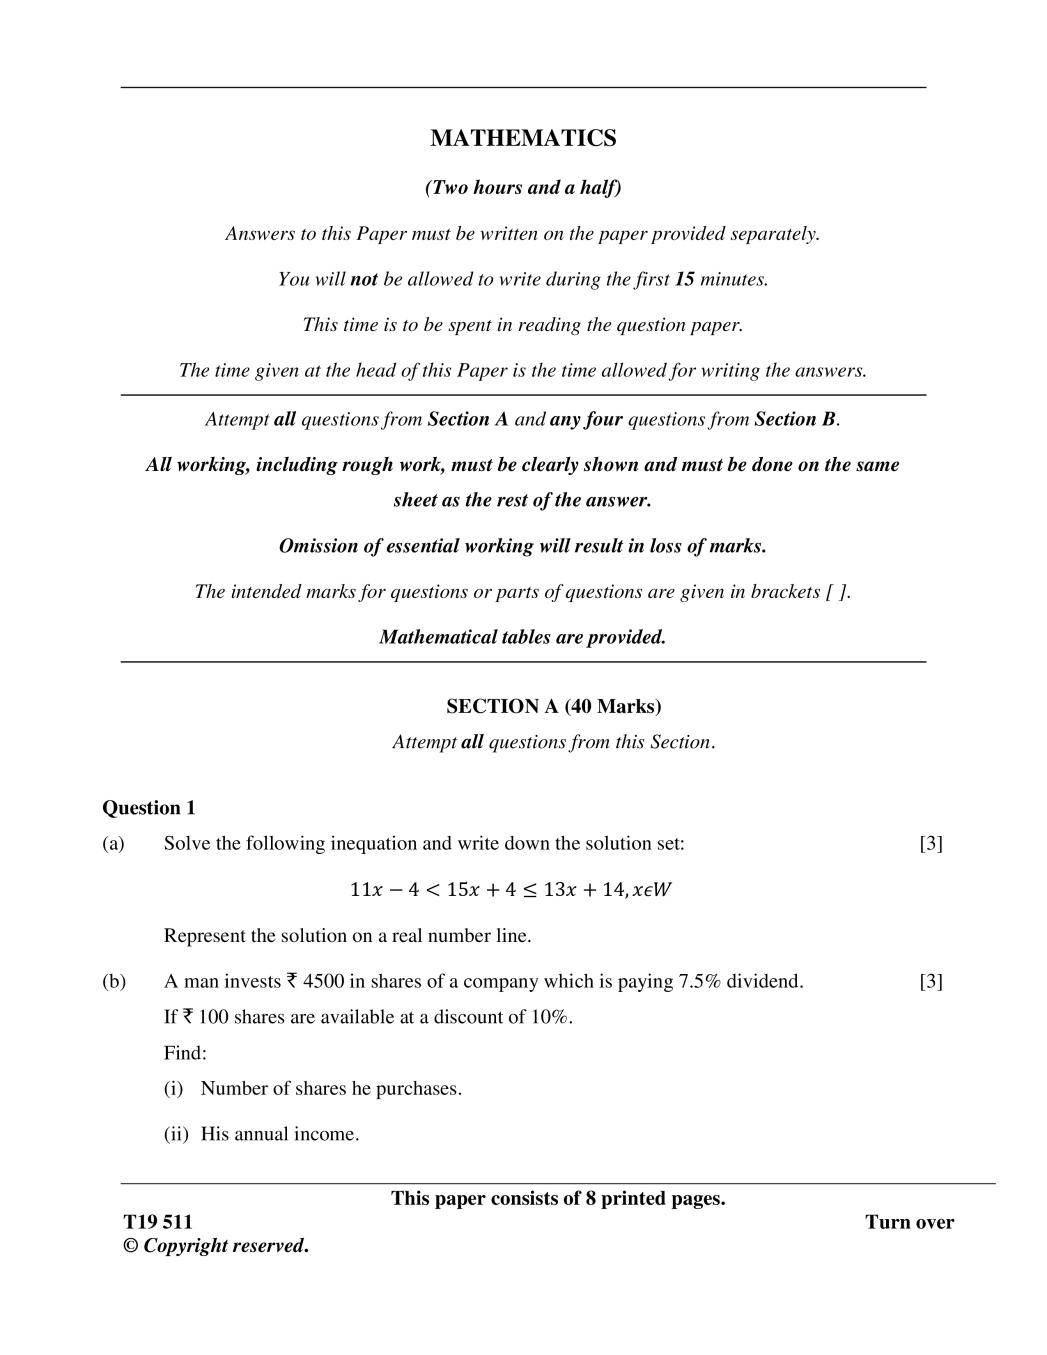 ICSE Class 10 Question Paper 2019 for Mathematics  - Page 1